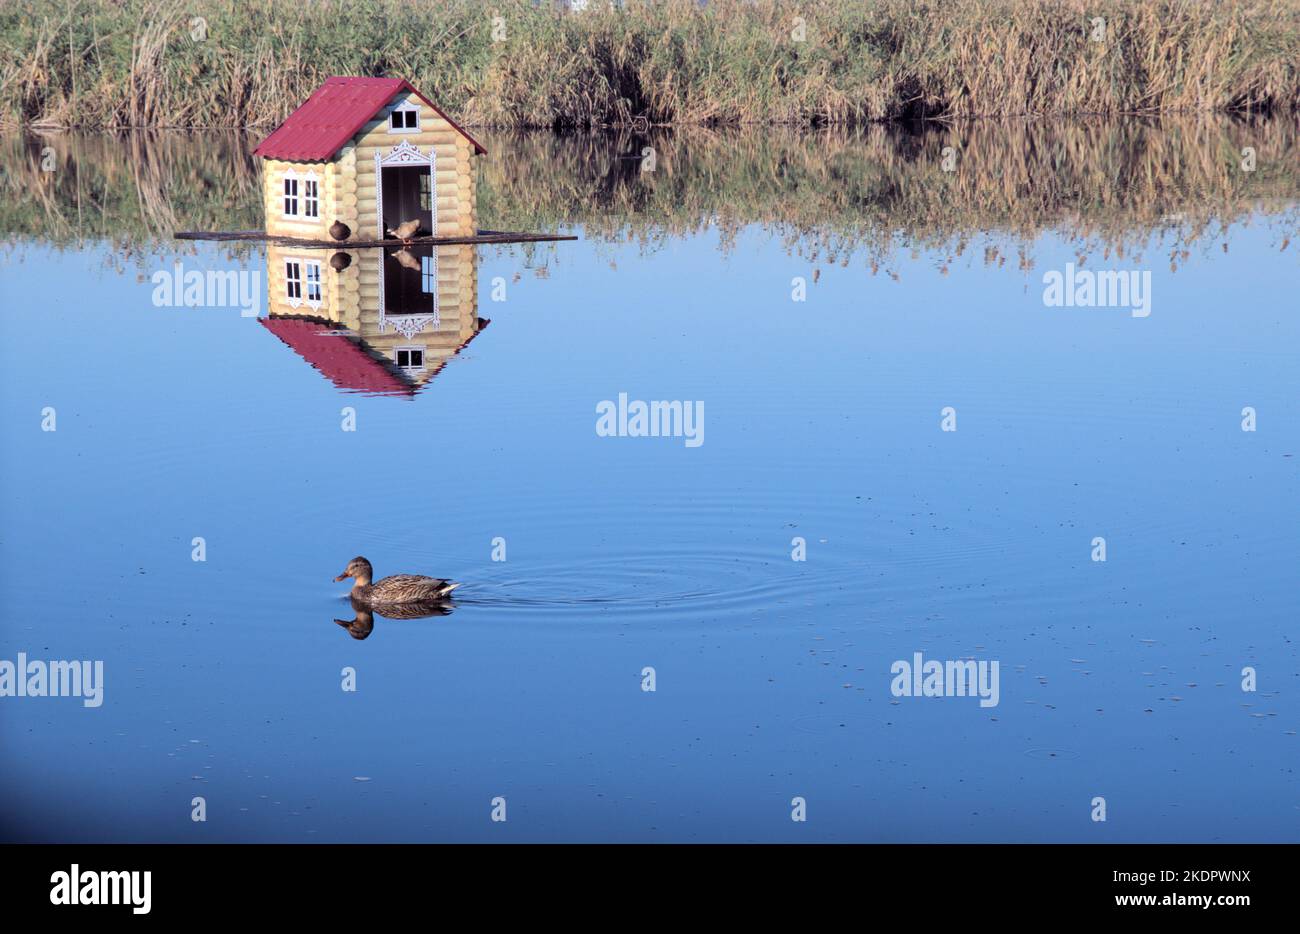 Beautiful natural landscape blue lake green thickets duck swims near ducks house background Stock Photo